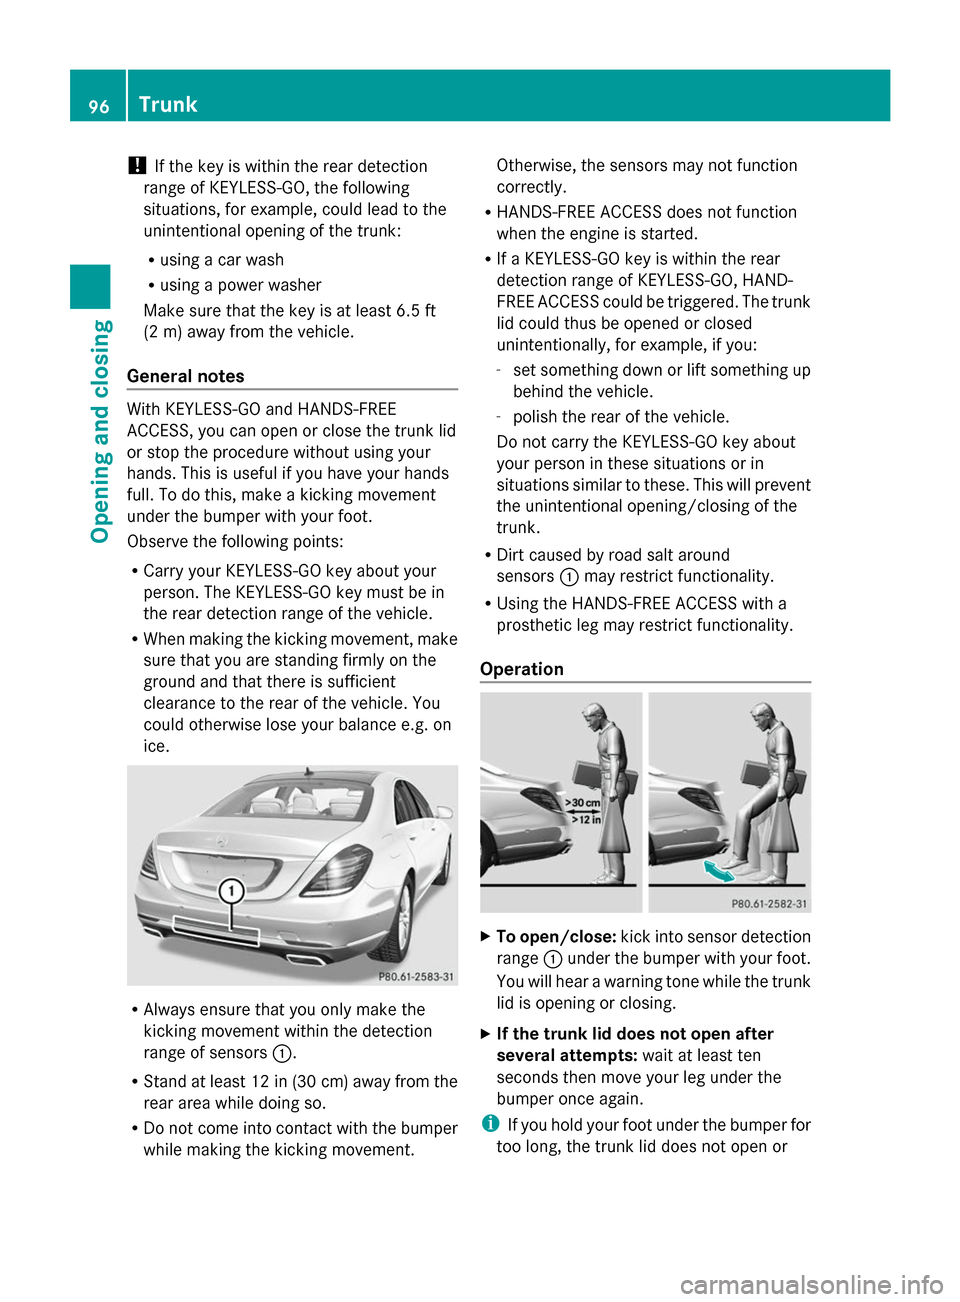 MERCEDES-BENZ S-Class 2014 W222 Owners Manual !
If the key is within the rear detection
range of KEYLESS-GO, the following
situations, for example, could lead to the
unintentional opening of the trunk:
R using a car wash
R using a power washer
Ma